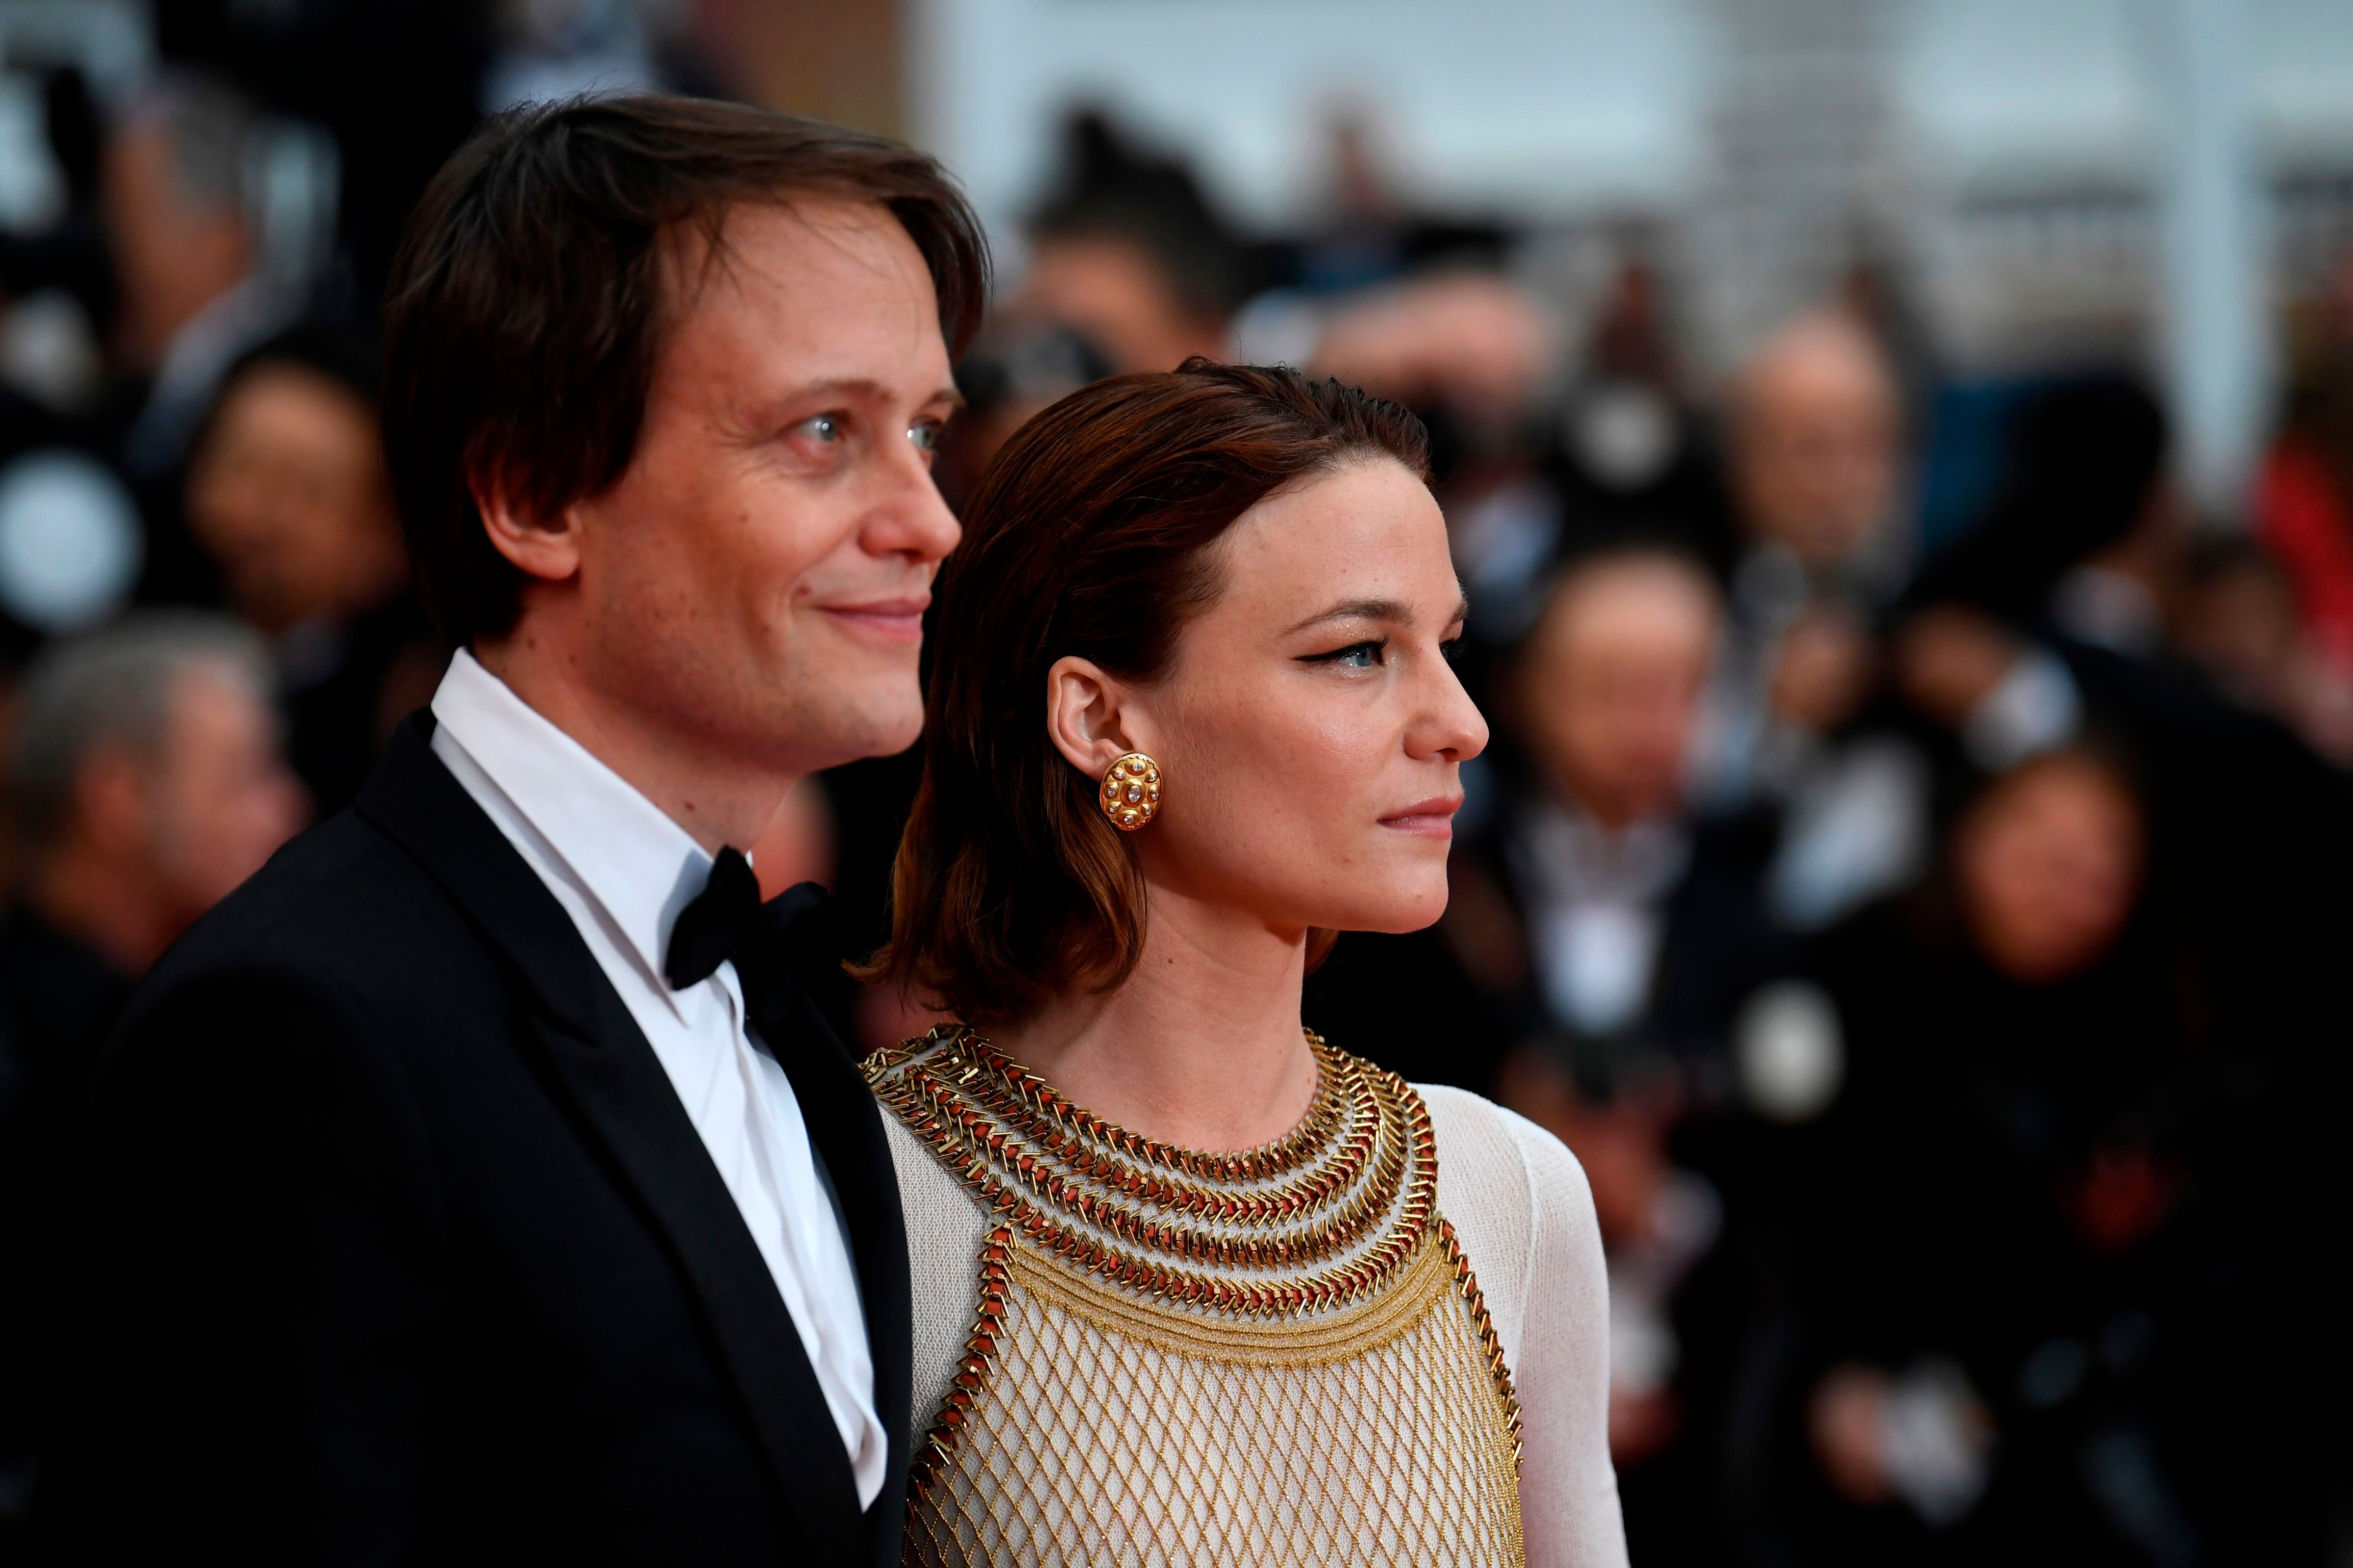 German actor August Diehl and Austrian actress Valerie Pachner arrive for the screening of the film 